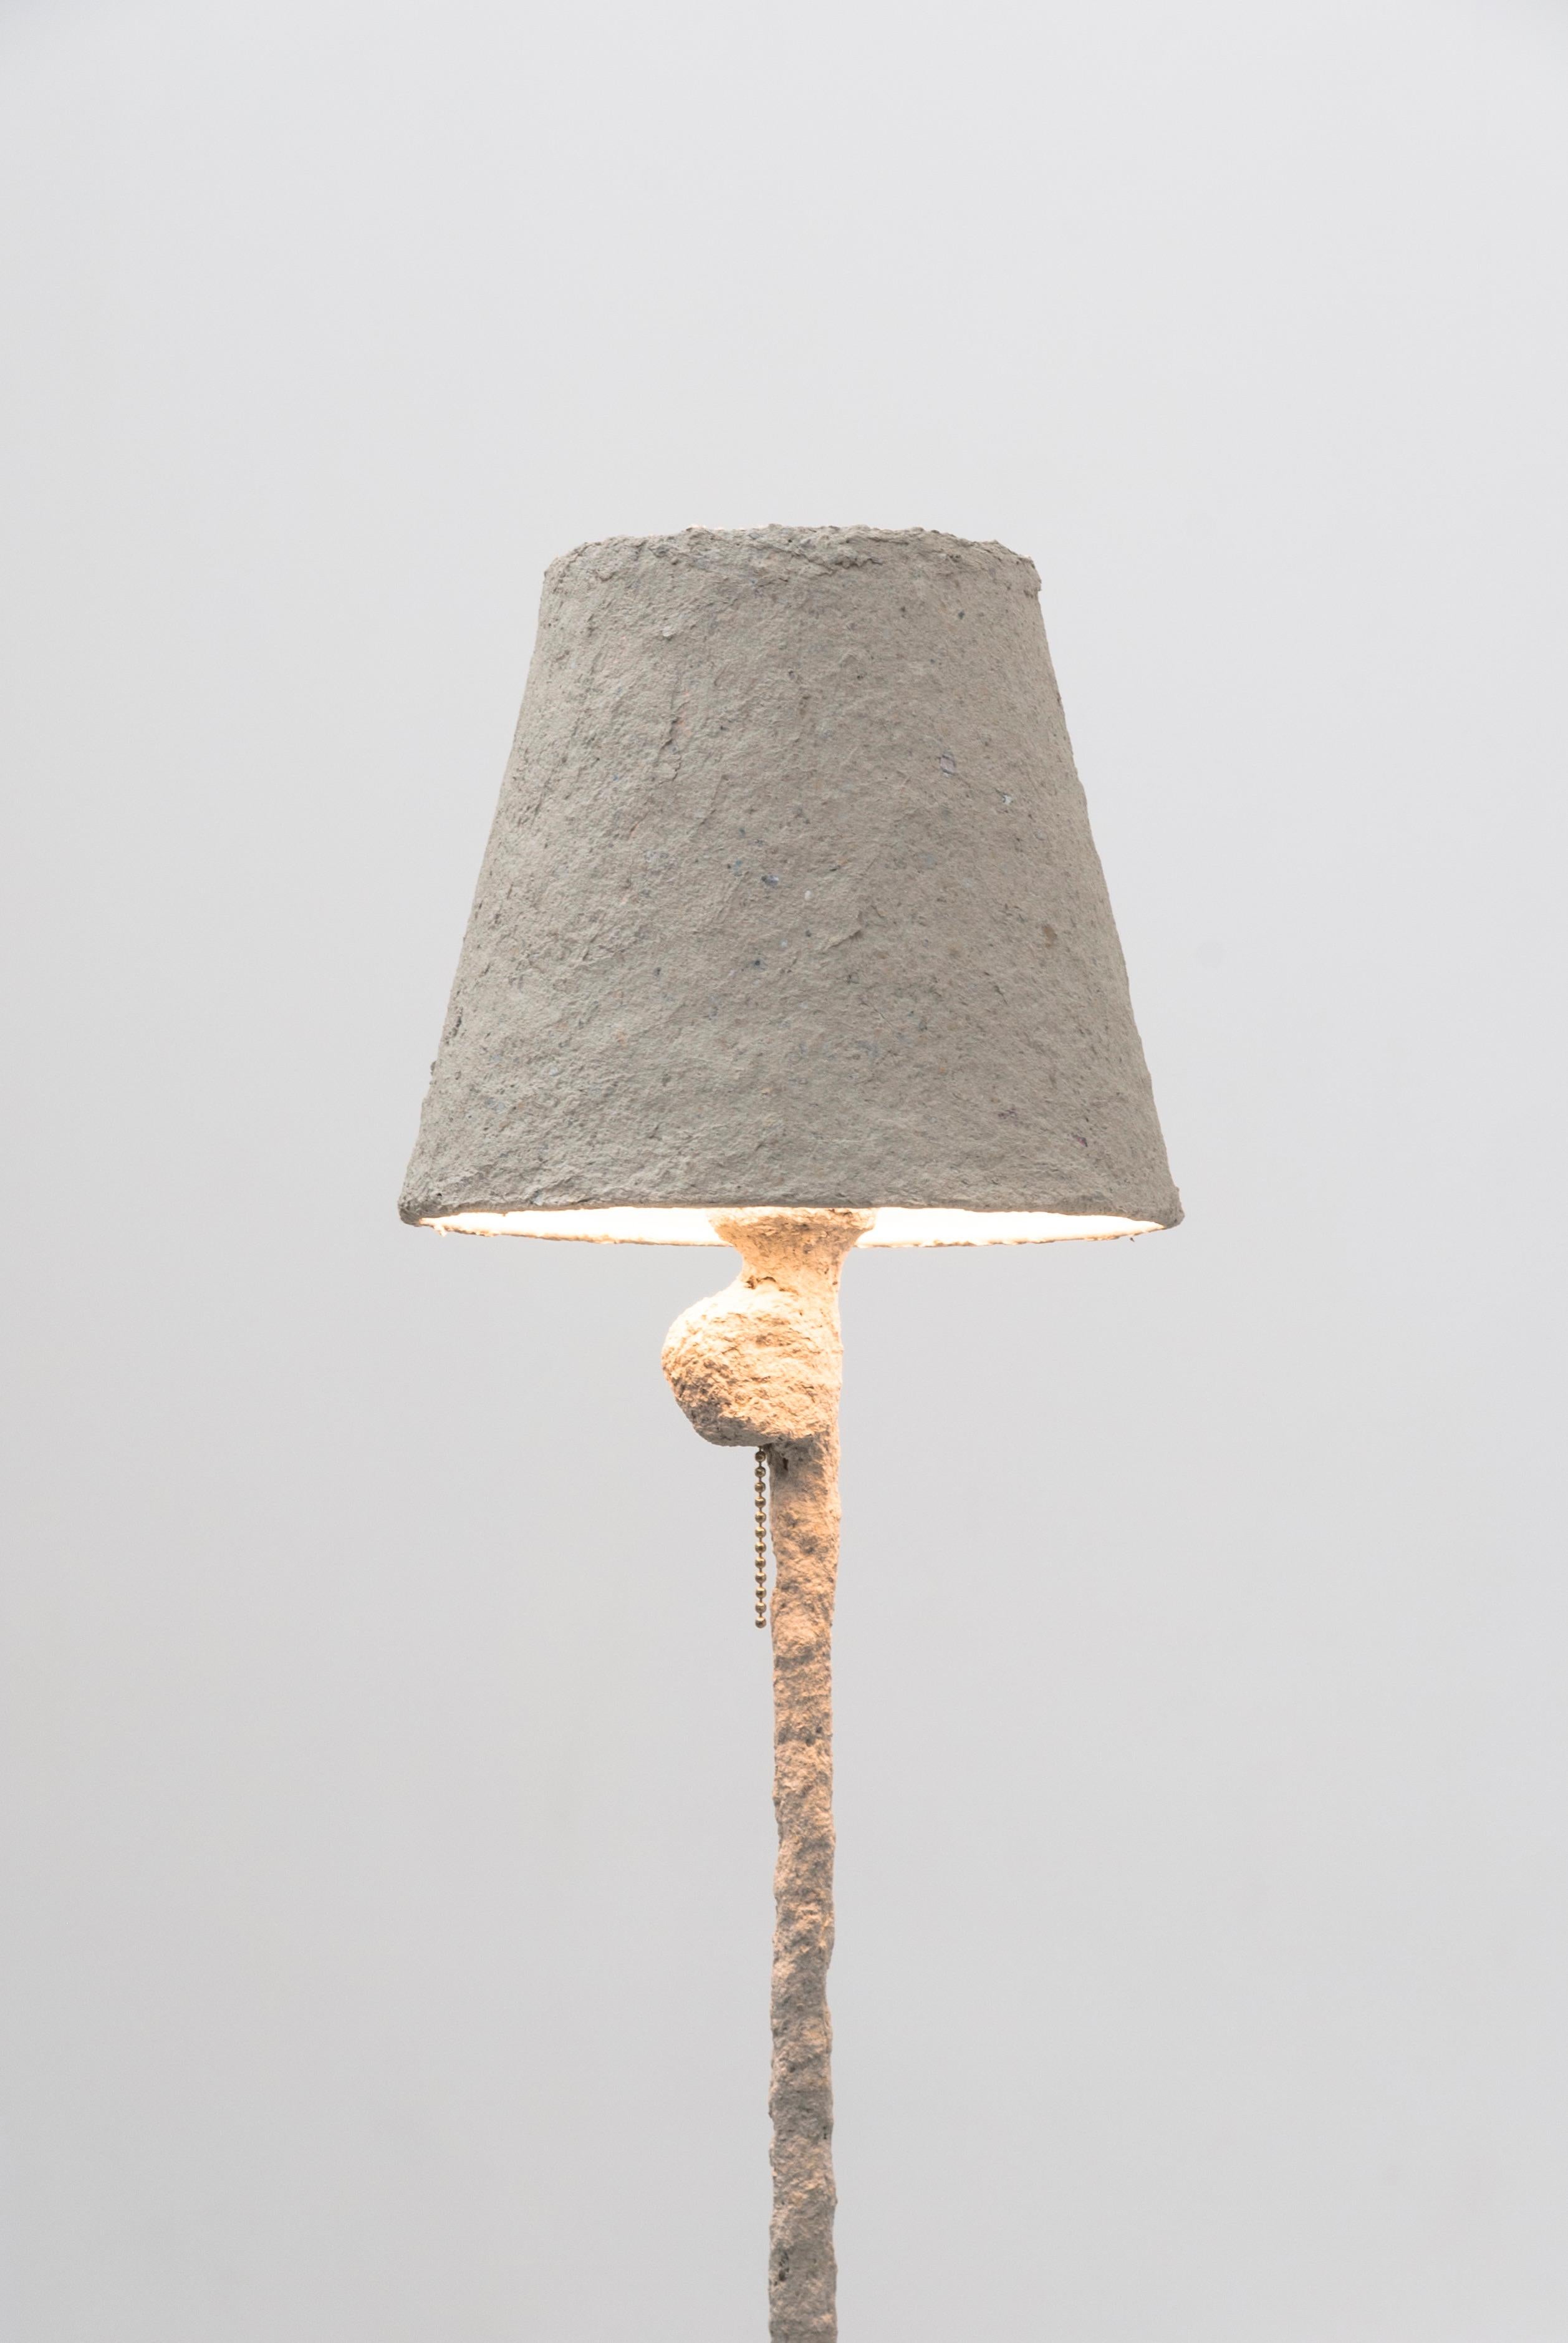 This Giacometti floor lamp by Bailey Fontaine is inspired by the works of Alberto Giacometti. The lamp is sculpted from unconventional materials like paper clay and silicone, which display a rich texture on a biomorphic surface. This minimalistic